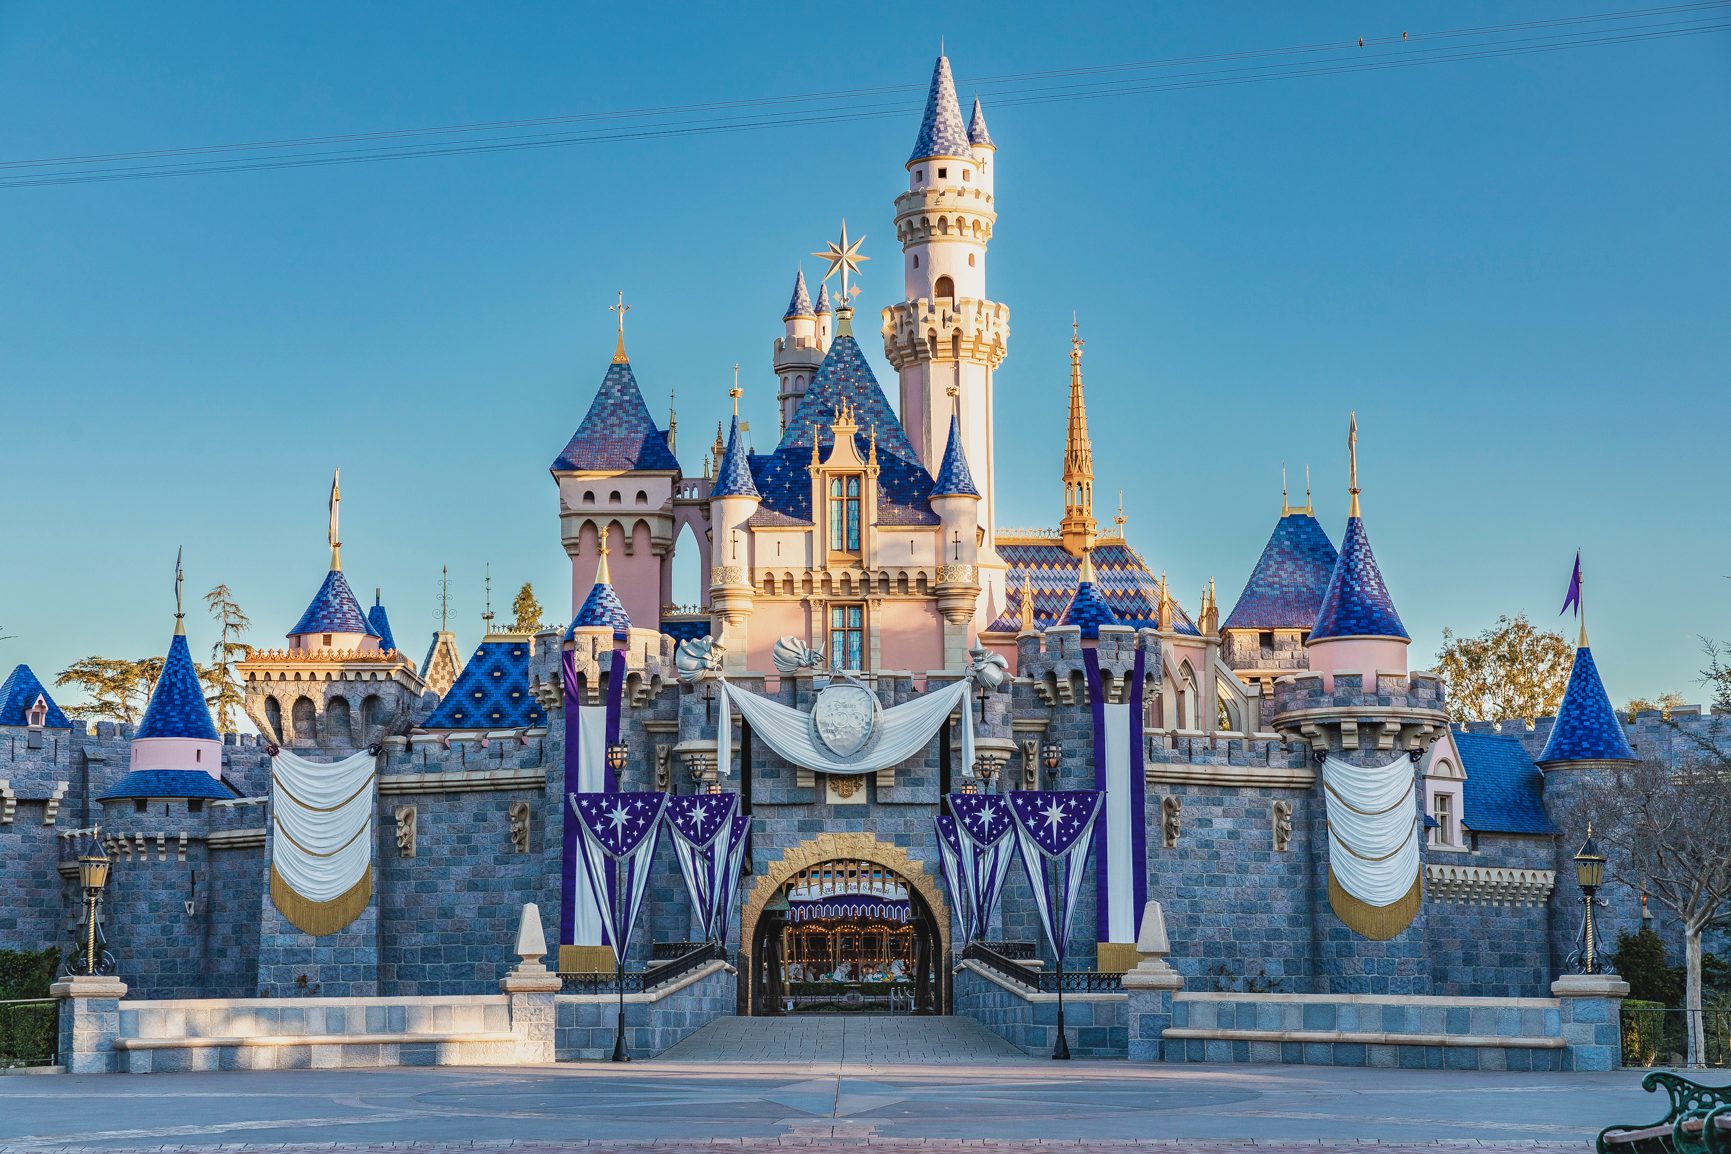 Disneyland Resort Announces Limited-Time Kids' Ticket Offer, Plus 8 Tips to  Plan and Save for Your Next Disneyland Visit